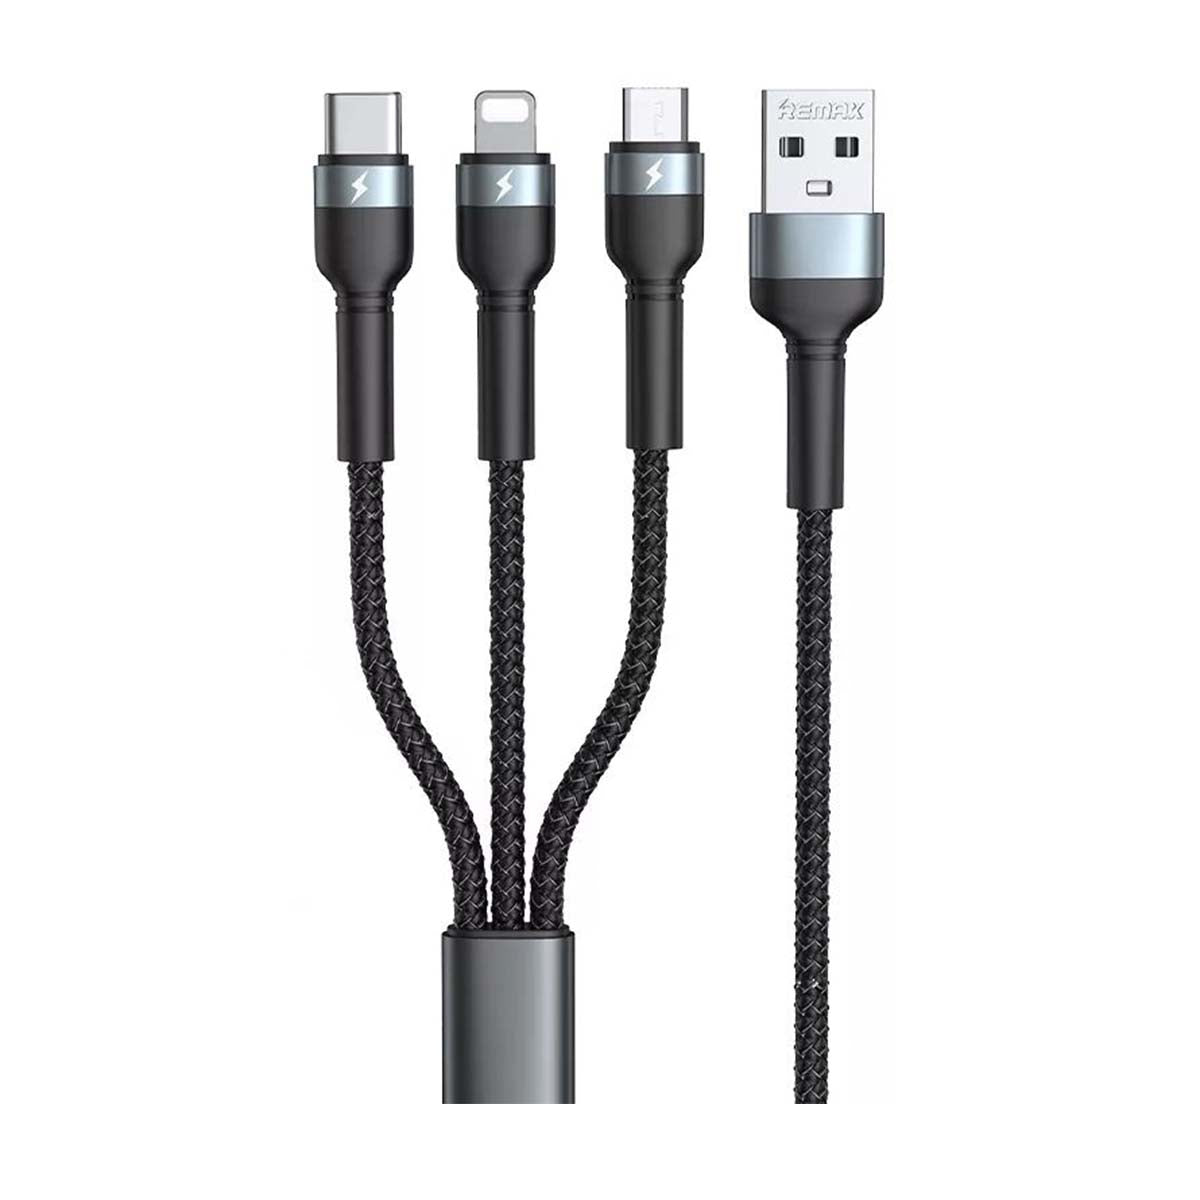 3 in 1 Universal Charging Cable, 3 in 1 USB to Type-C+Micro USB+ Lightning Charging Cable